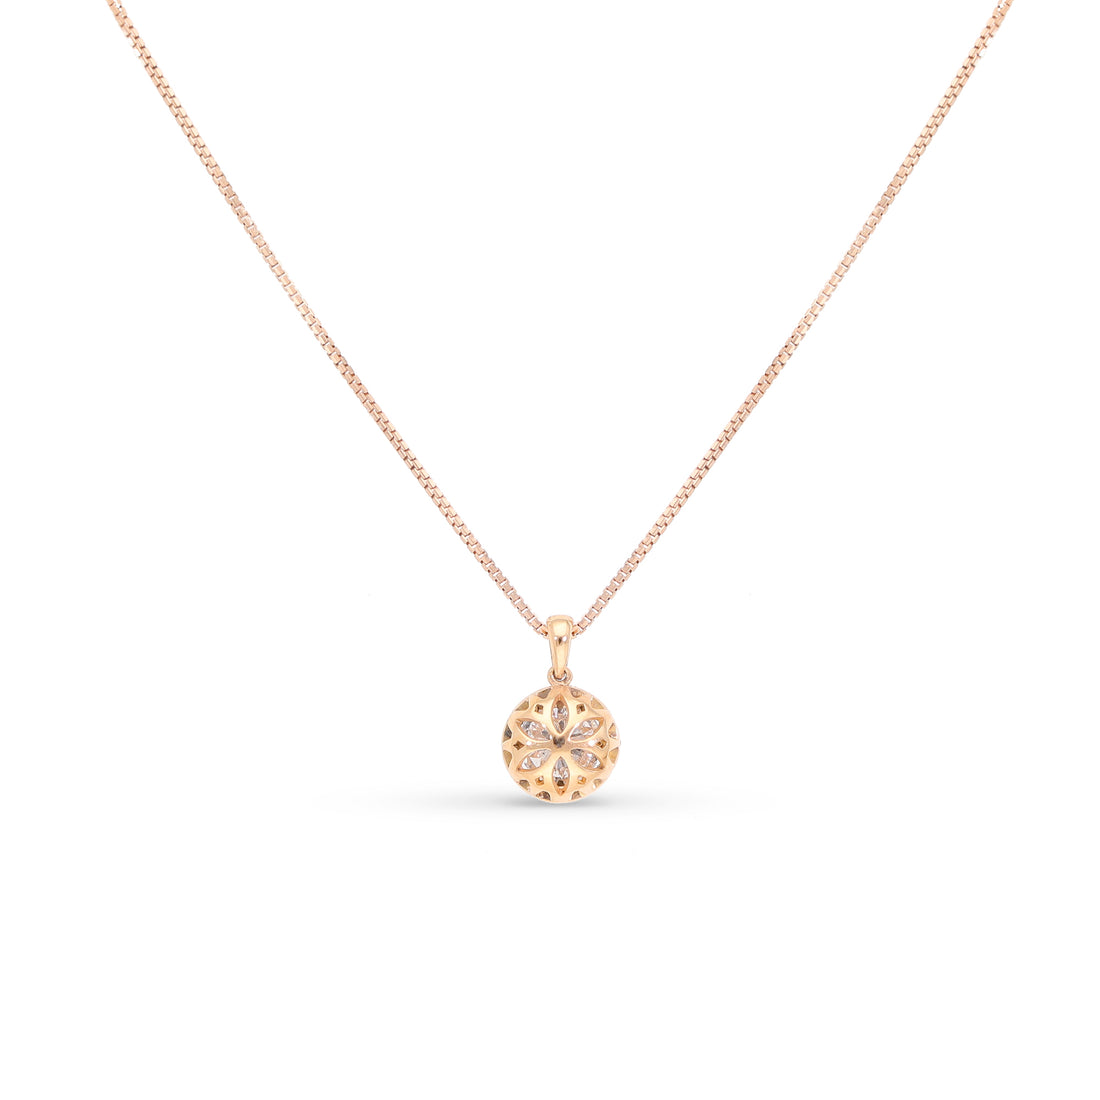 1.12 Classic Halo diamond pendant set in 18K rose gold  Center Diamond:   Weight: 1.01 Shape: Round  Color: D Clarity: SI2 Side Stones:  0.11 Carat micro pave setting